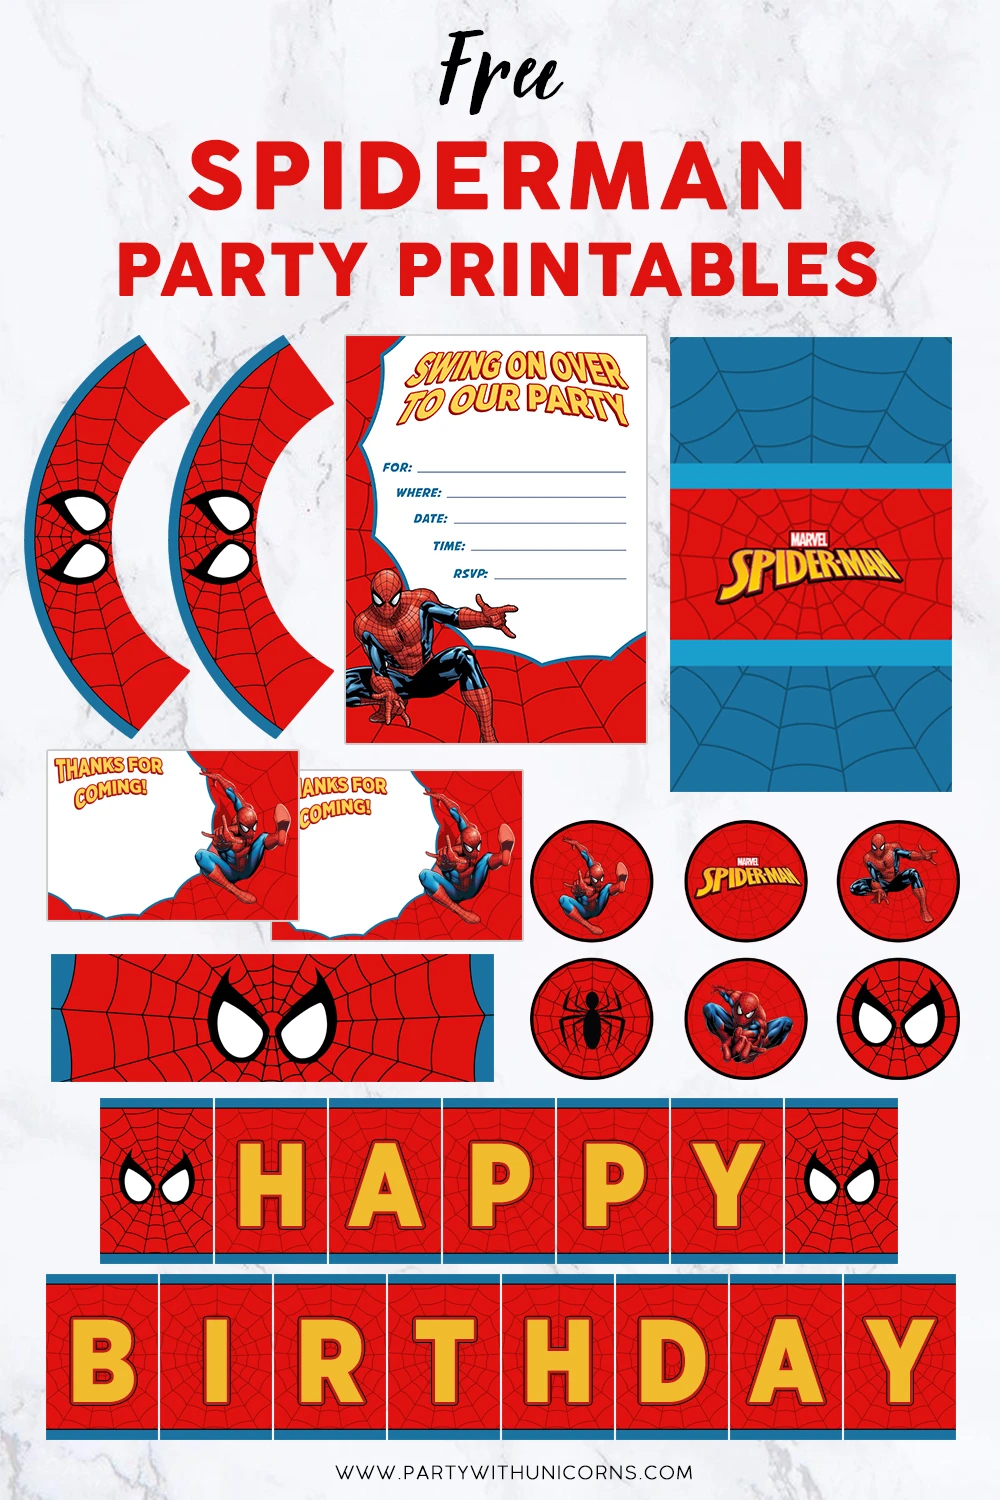 Included in Spiderman party set